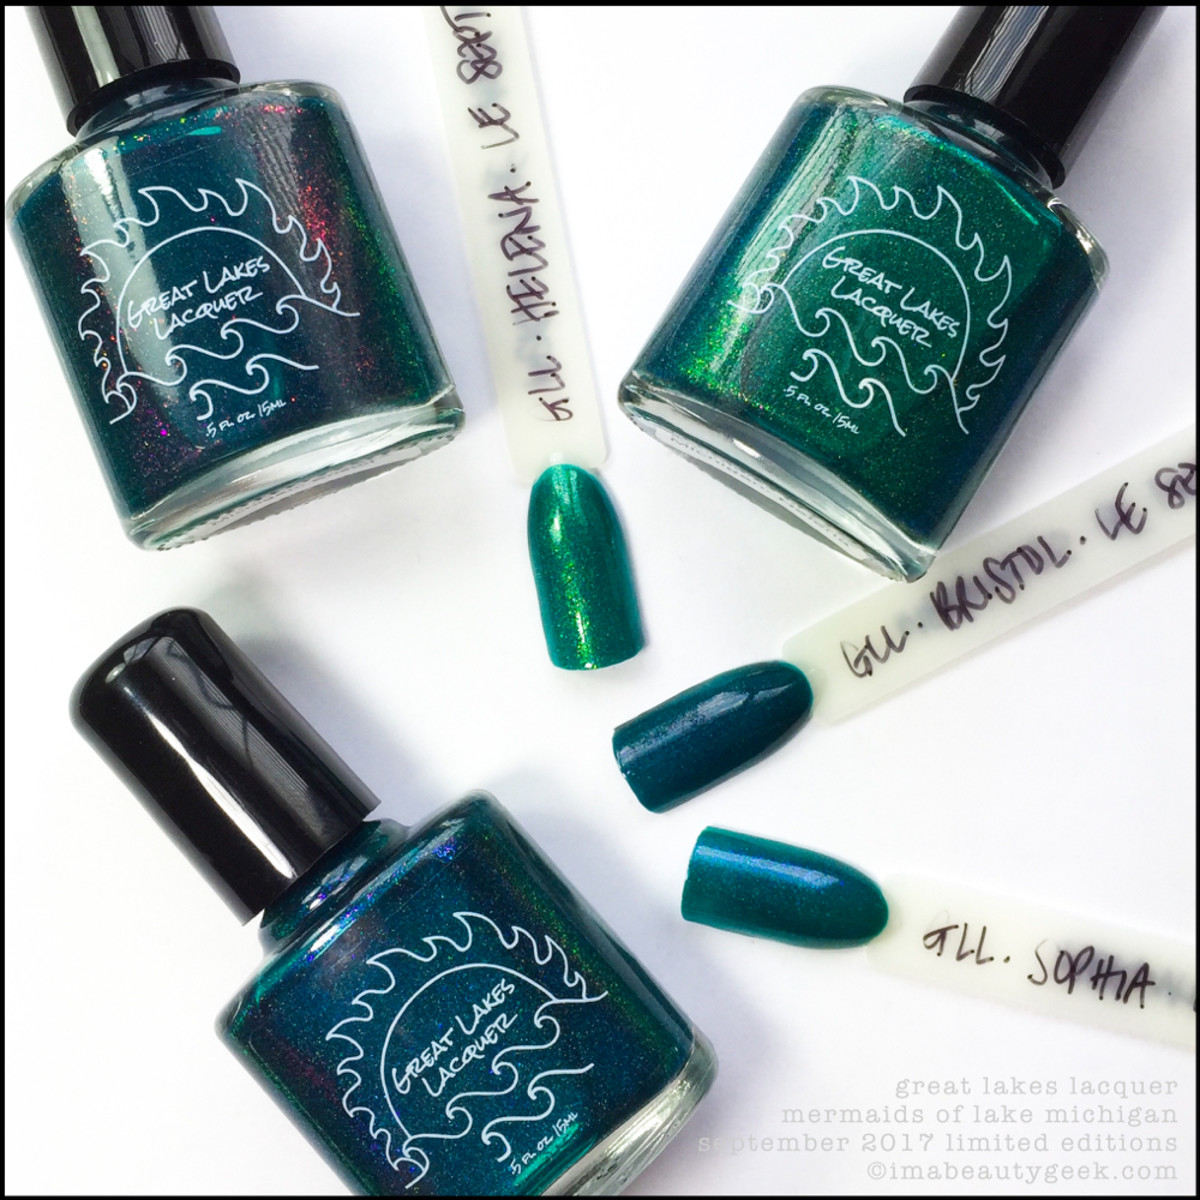 Great Lakes Lacquer Mermaids of Lake Michigan September 2017 Swatches & Review